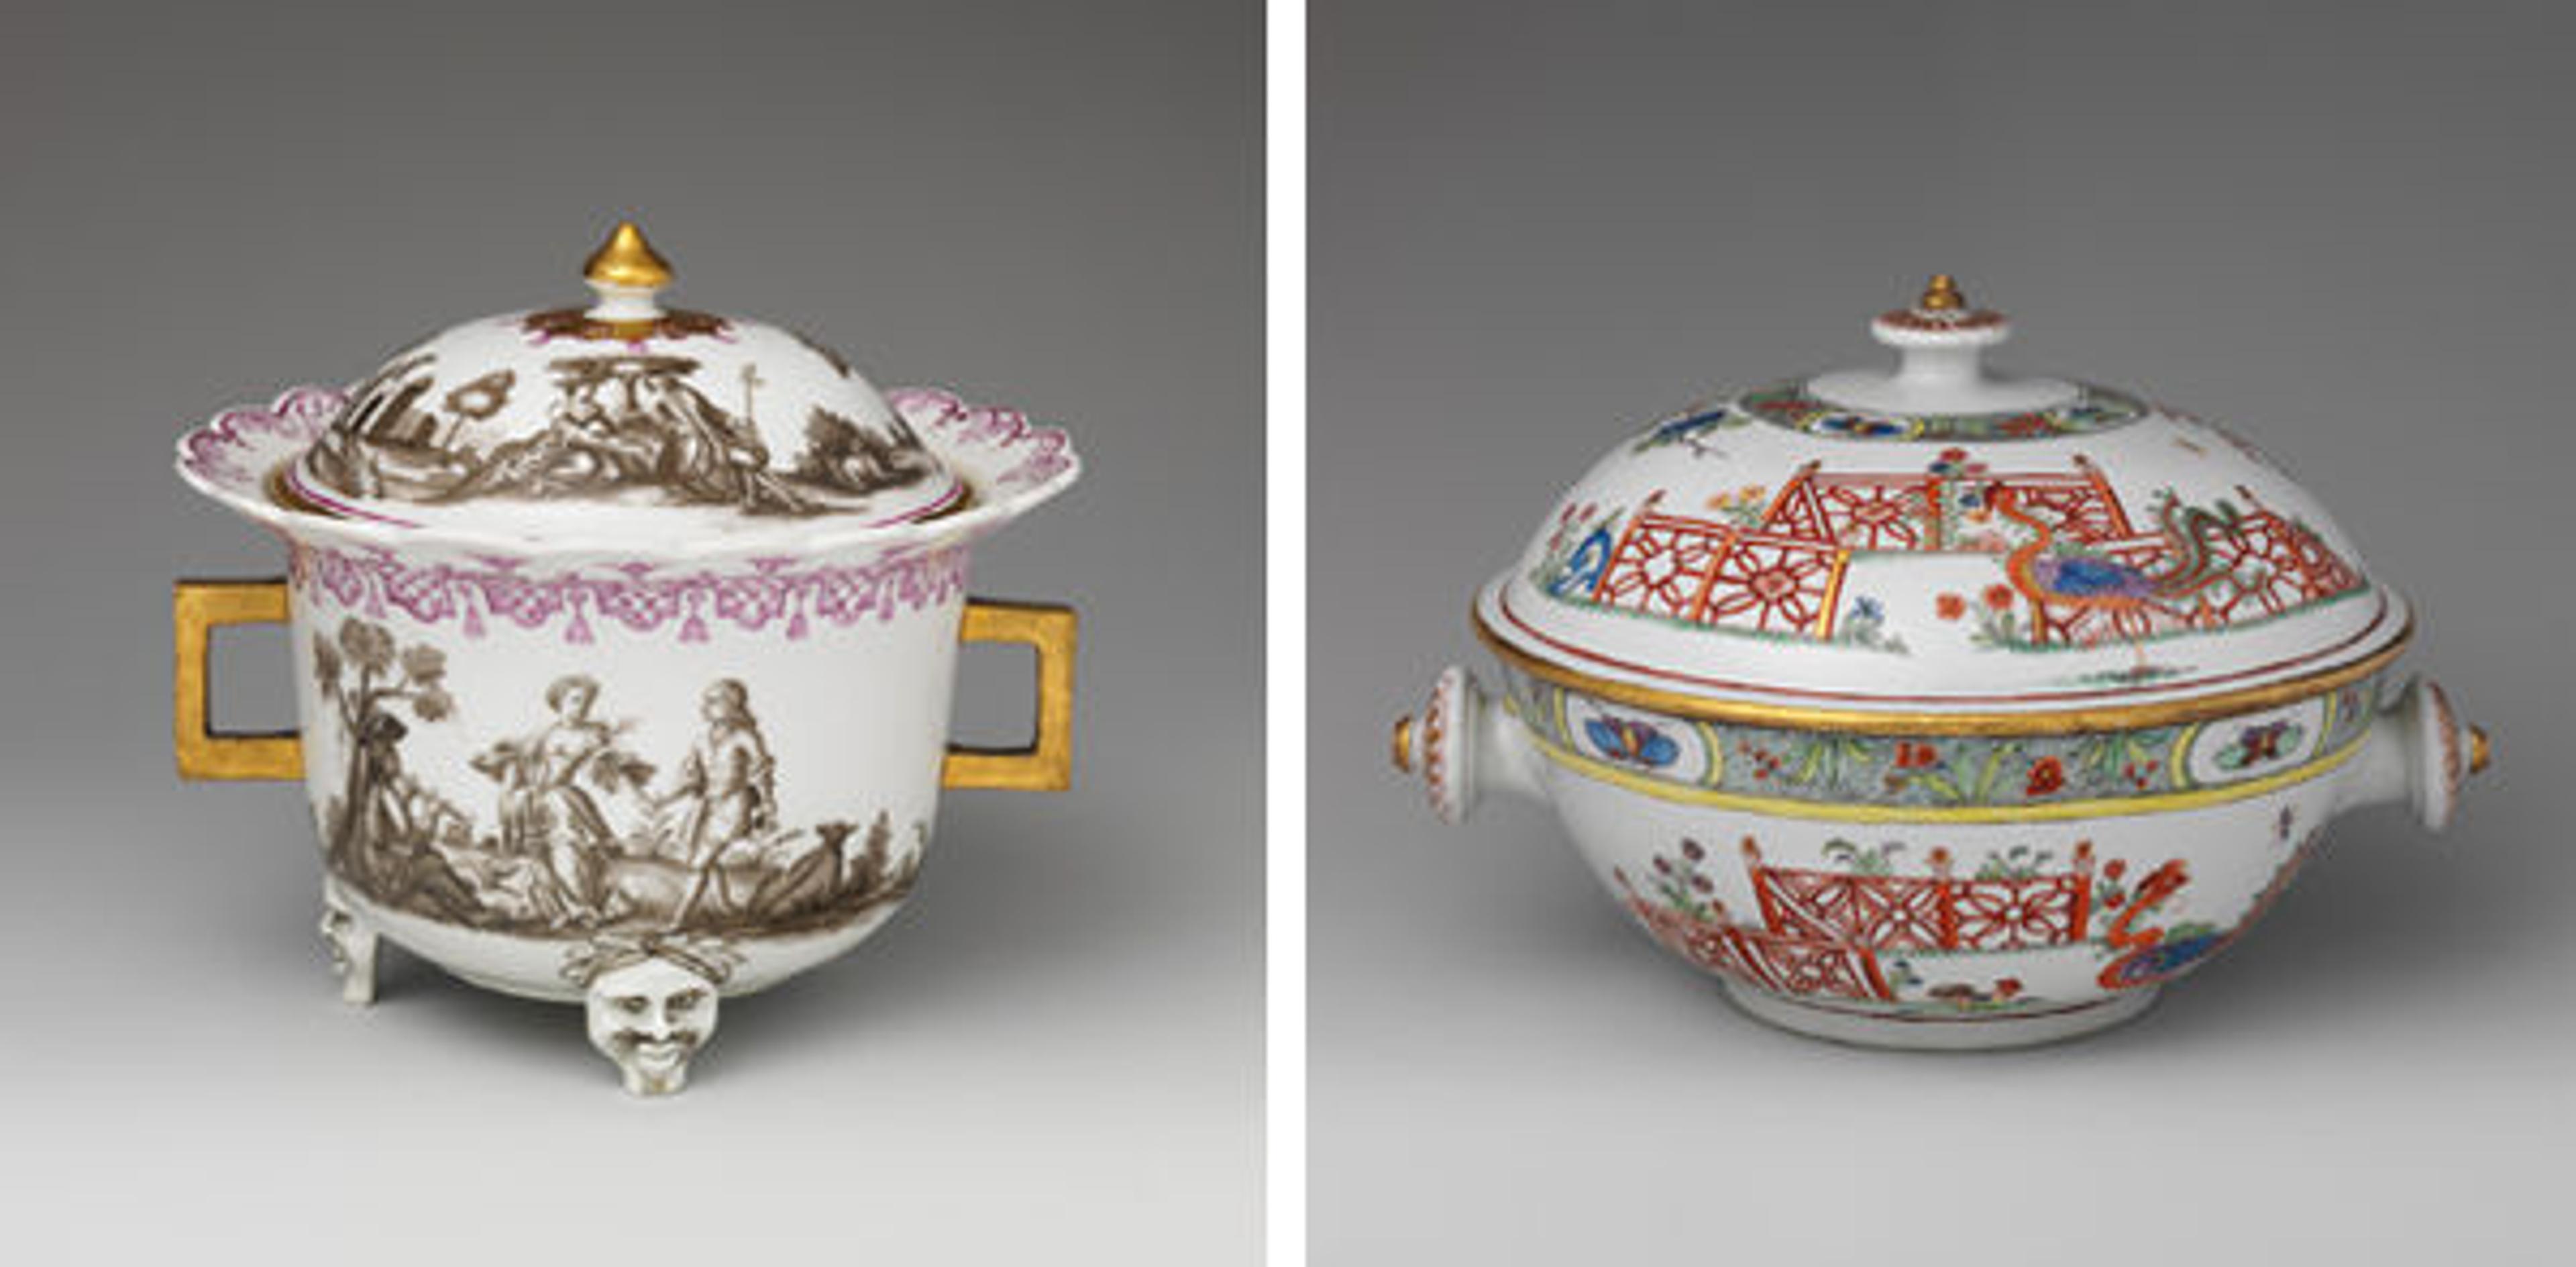 Covered bowl with Figures in Landscape and Tureen with Phoenixes in Landscape